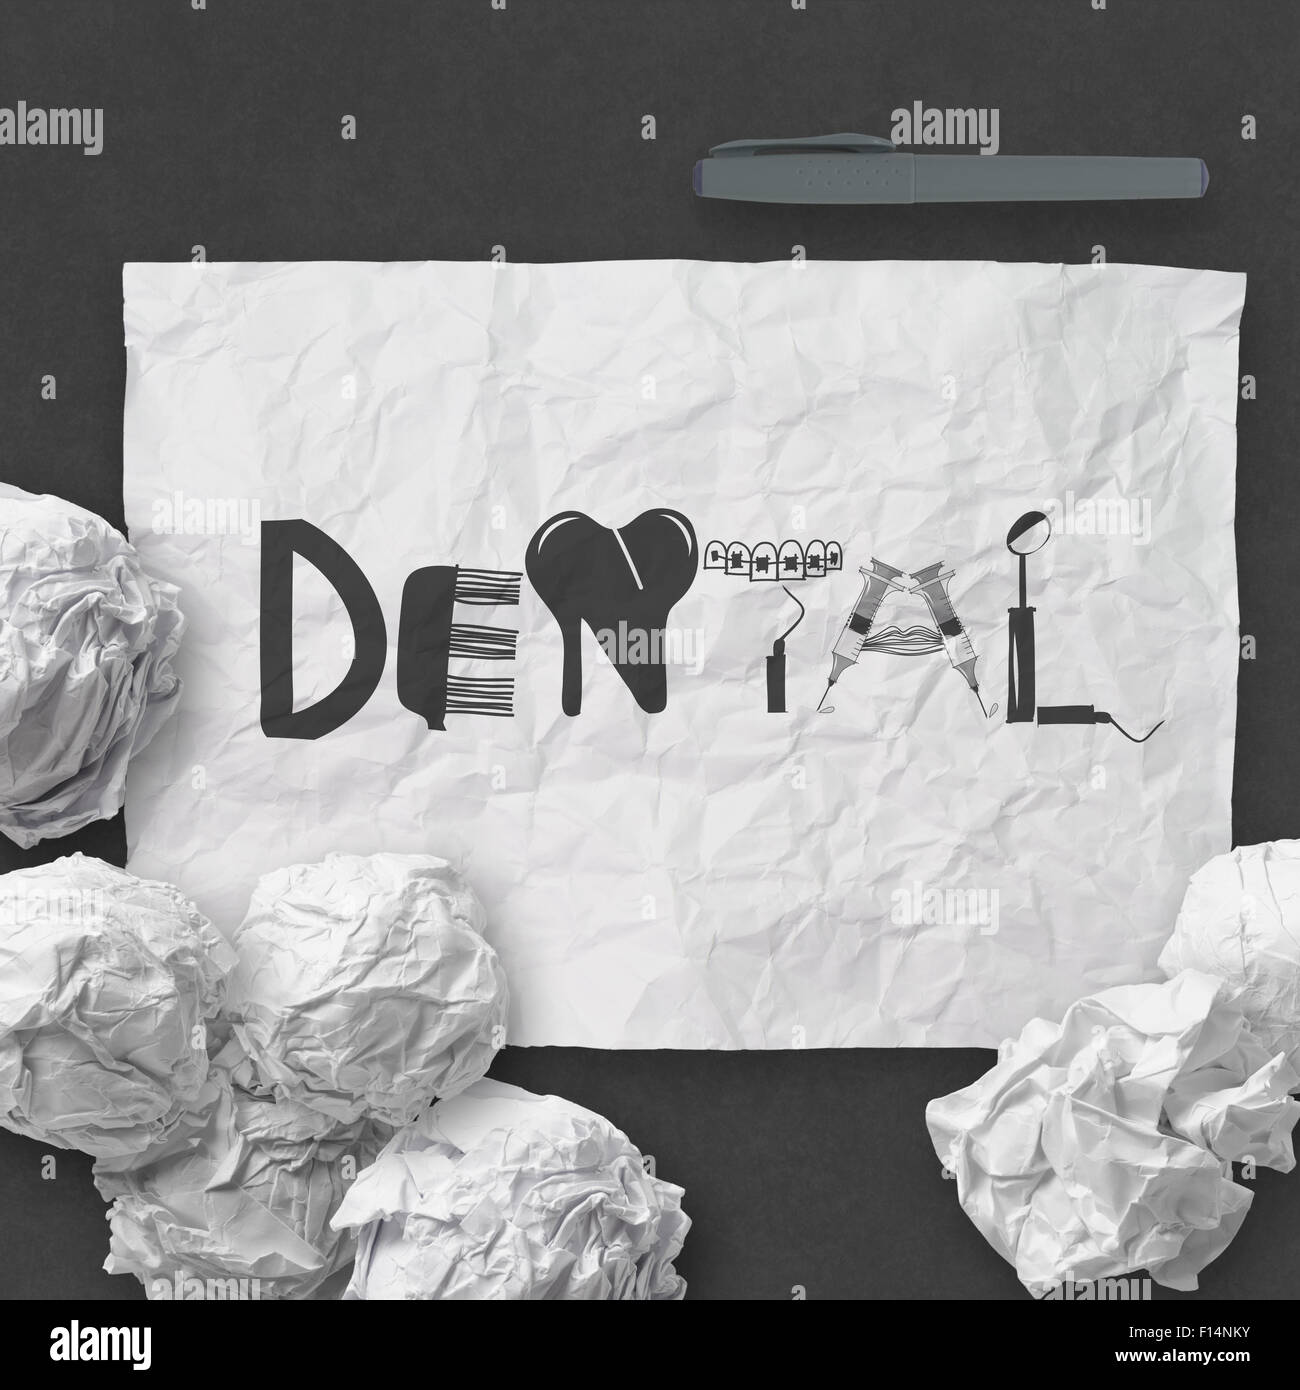 design word DENTAL on white crumpled paper and texture background as concept Stock Photo